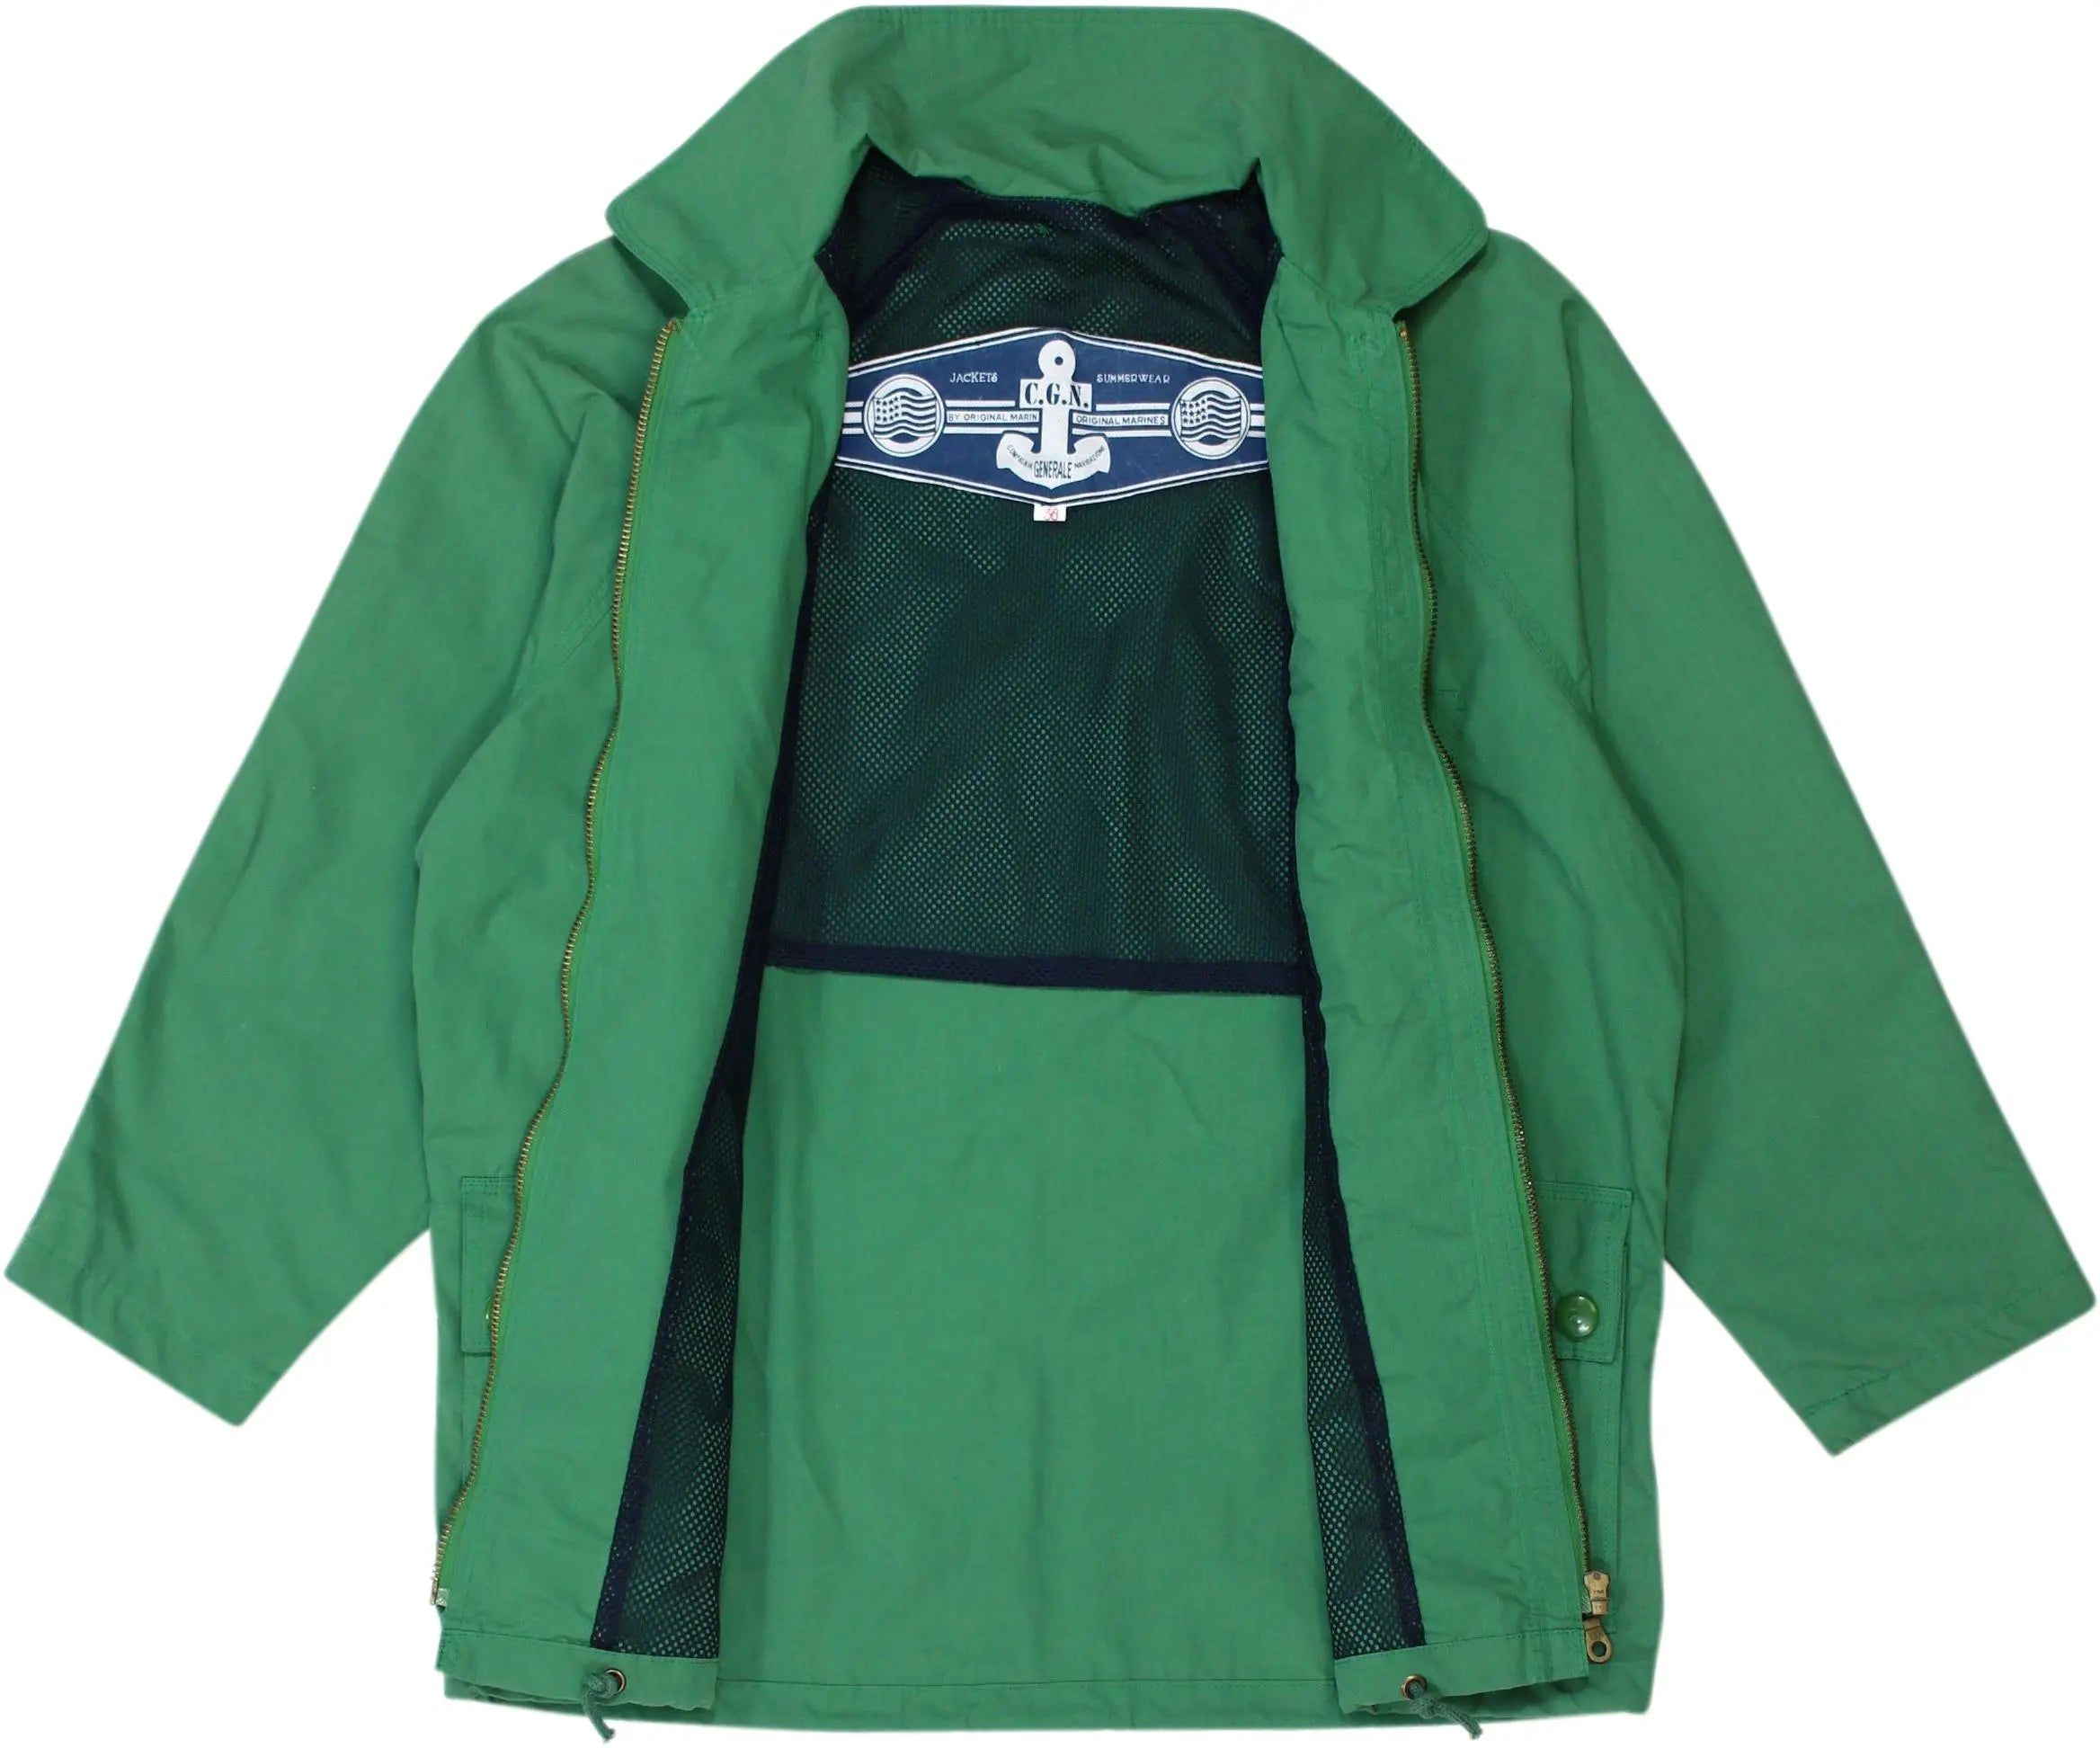 Original Marines - Green Jacket by Original Marines- ThriftTale.com - Vintage and second handclothing